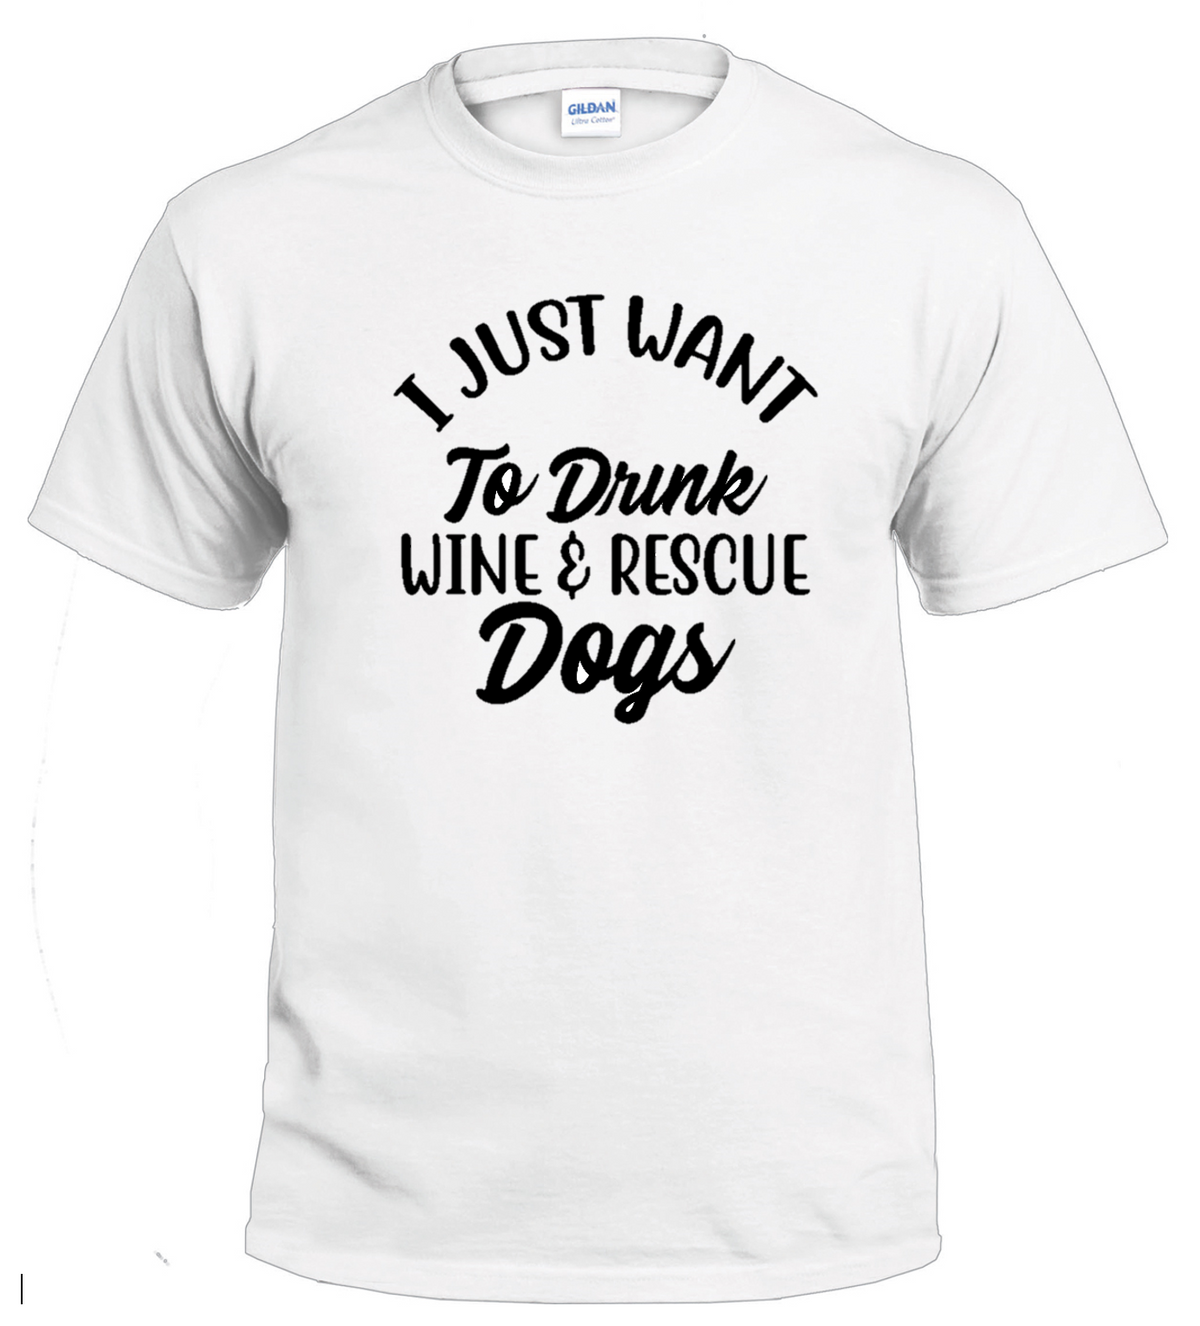 I Just Want to Drink Wine & Rescue Dogs t-shirt